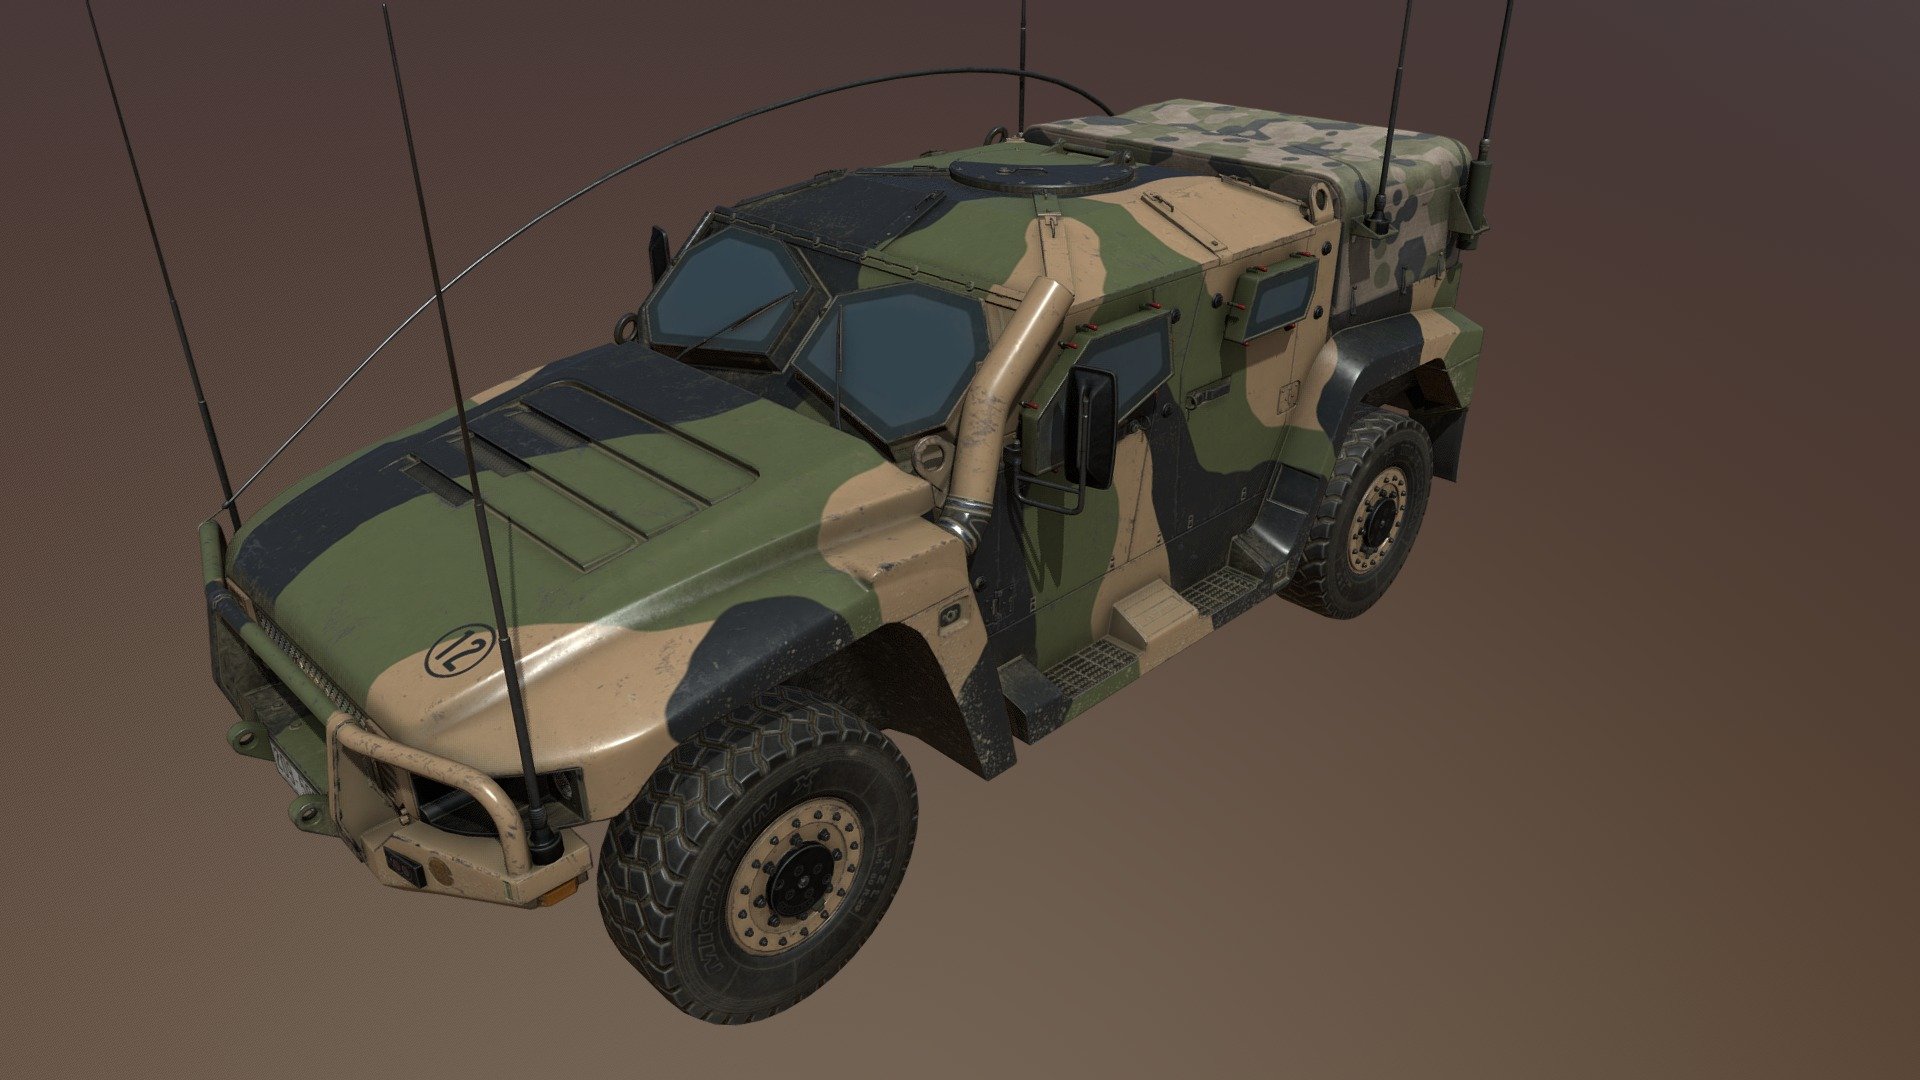 The Hawkei PMV is a light 4 x 4 protected mobility vehicle originally designed to meet an Australian Defence Force (ADF) requirement for a light armoured patrol vehicle. 

Project LAND 121 is a multi-phase project providing the ADF with current-generation, high-capability field vehicles, modules and trailers 3d model